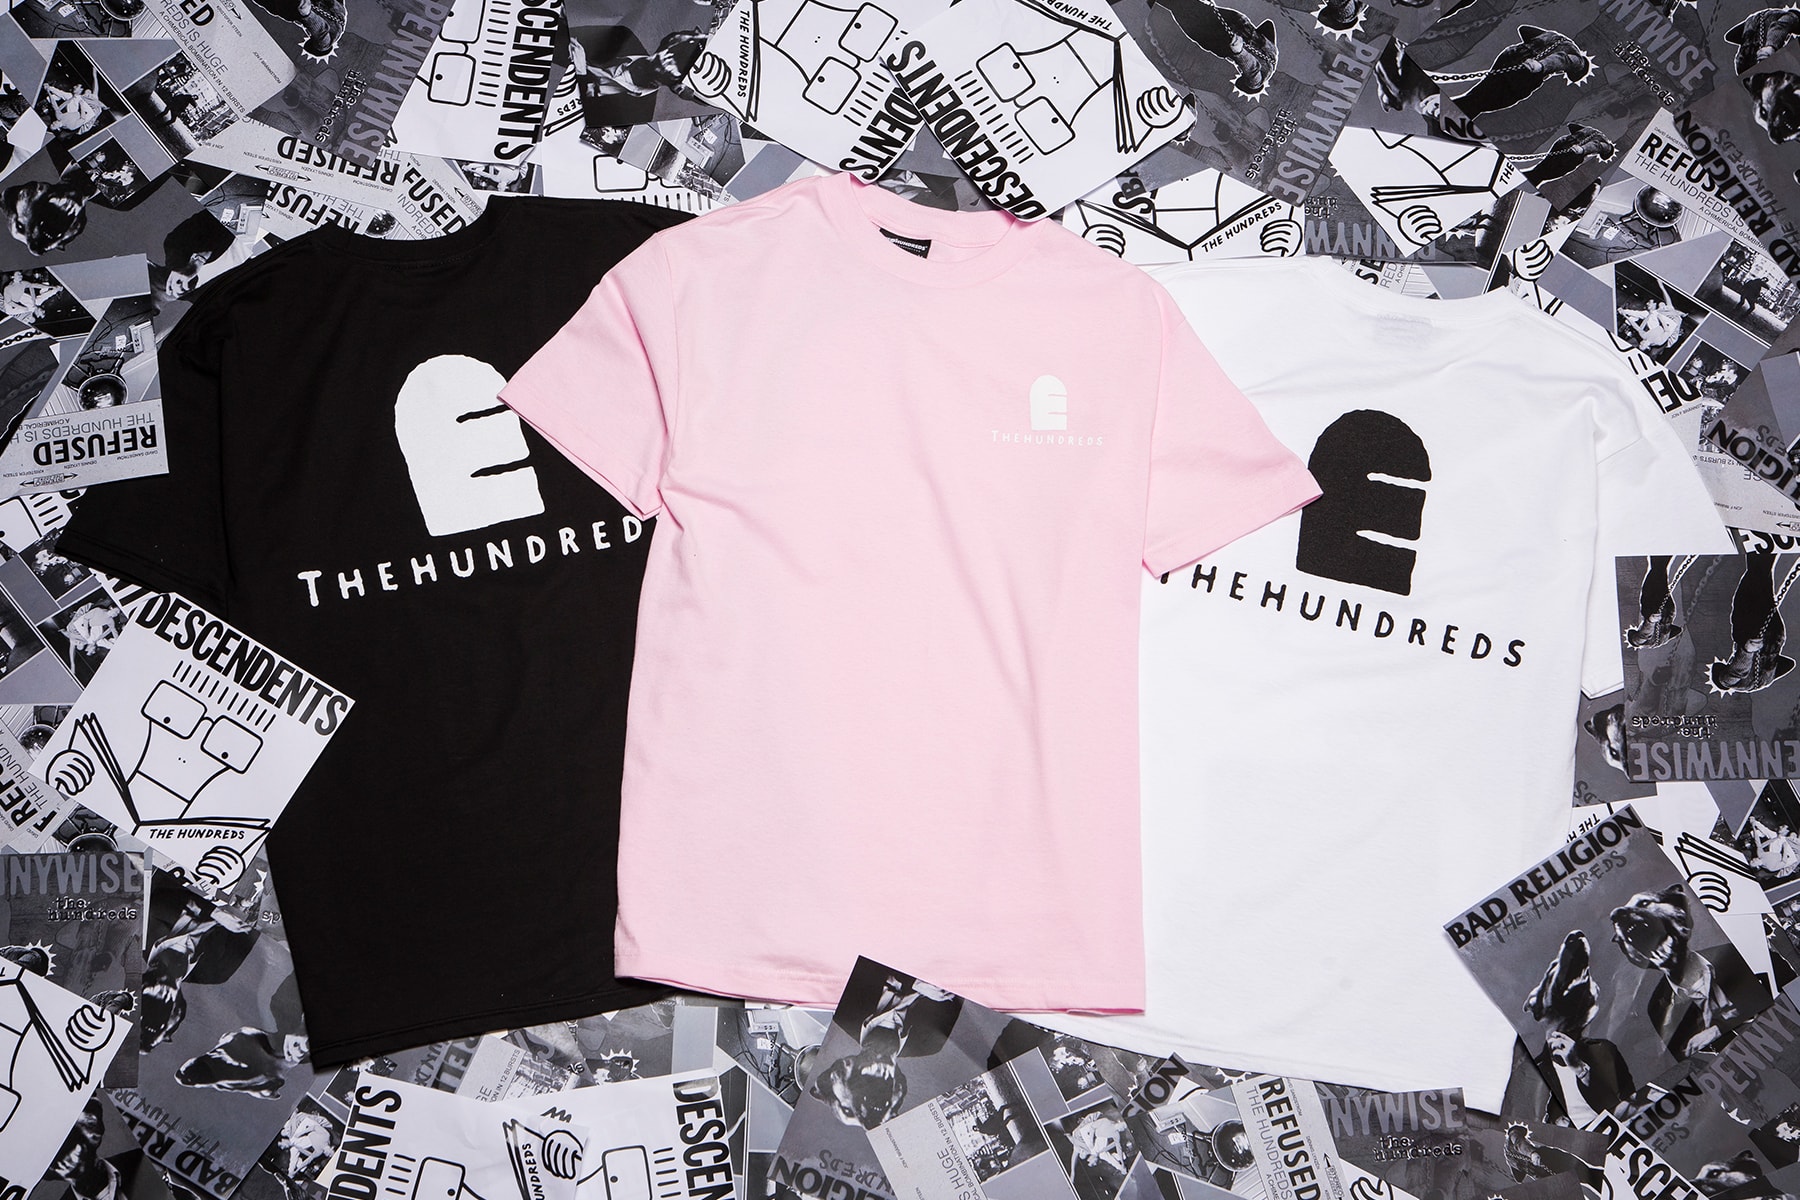 The Hundreds x Epitaph Records Collection 2016 tshirts music Bad Religion Recipe for Hate Refused The Shape of Punk to Come Pennywise Unknown Road Descendents Everything Sucks pink white black blue